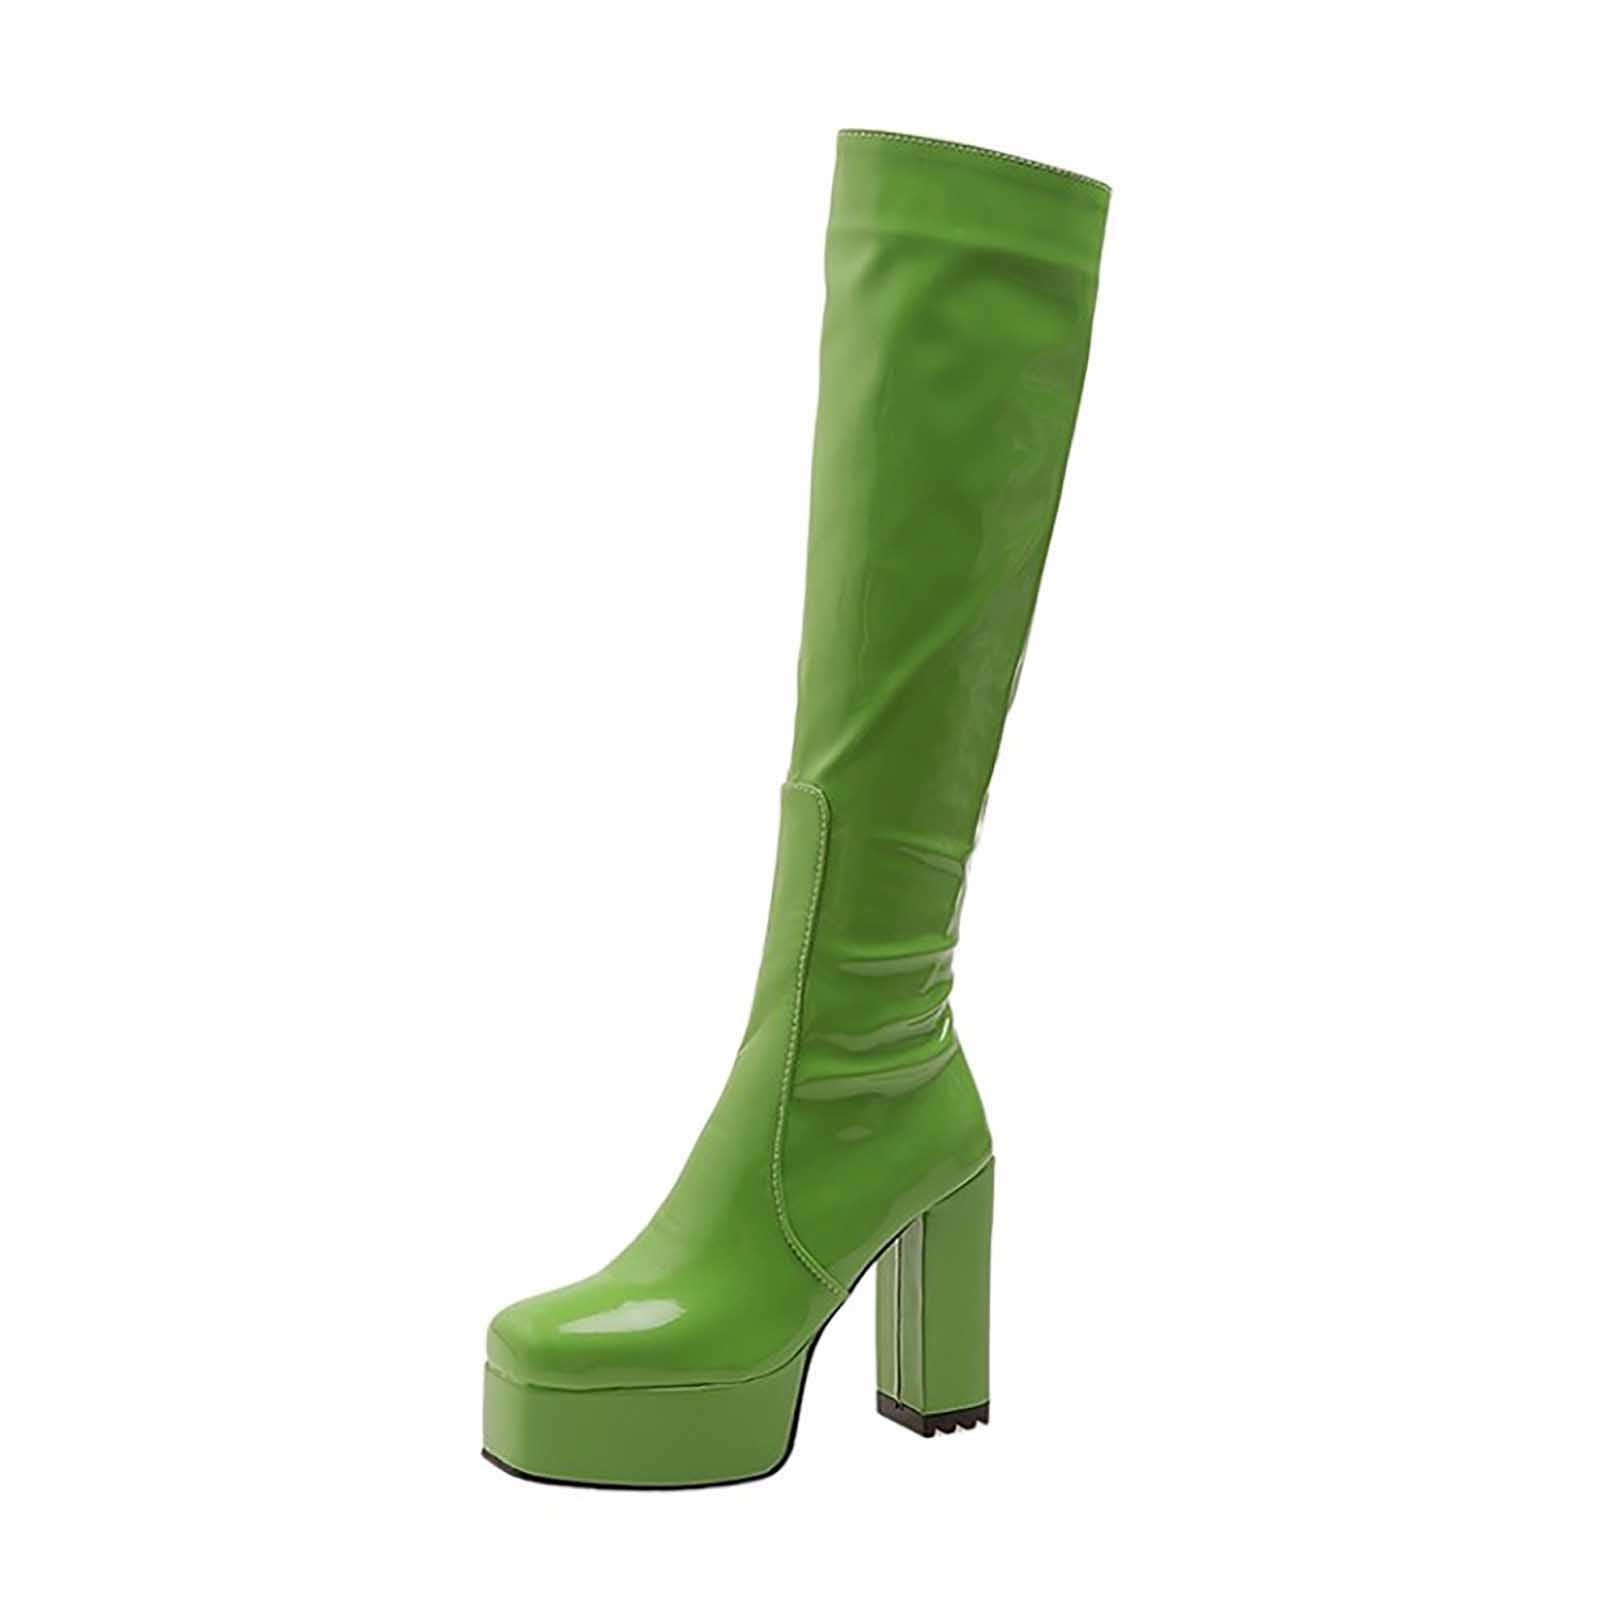 Homadles Women's Middle Knee High Boots Wide- Plus Size High Heel